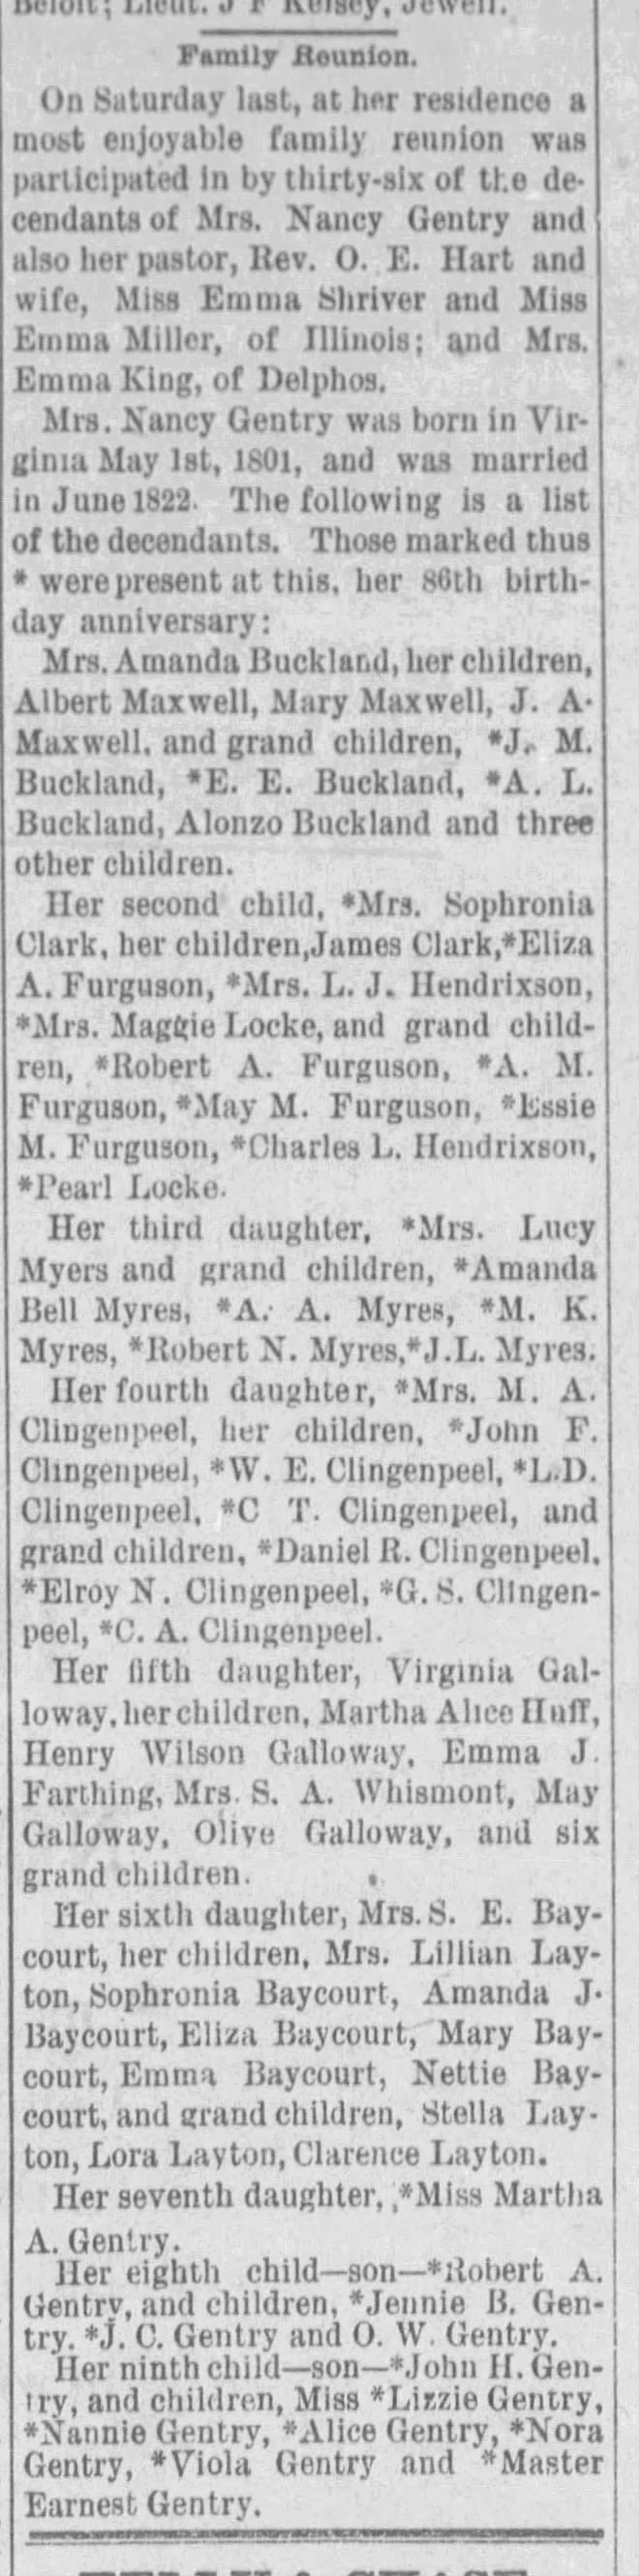 Minneapolis Daily Messenger
May 2, 1887
Gentry family reunion